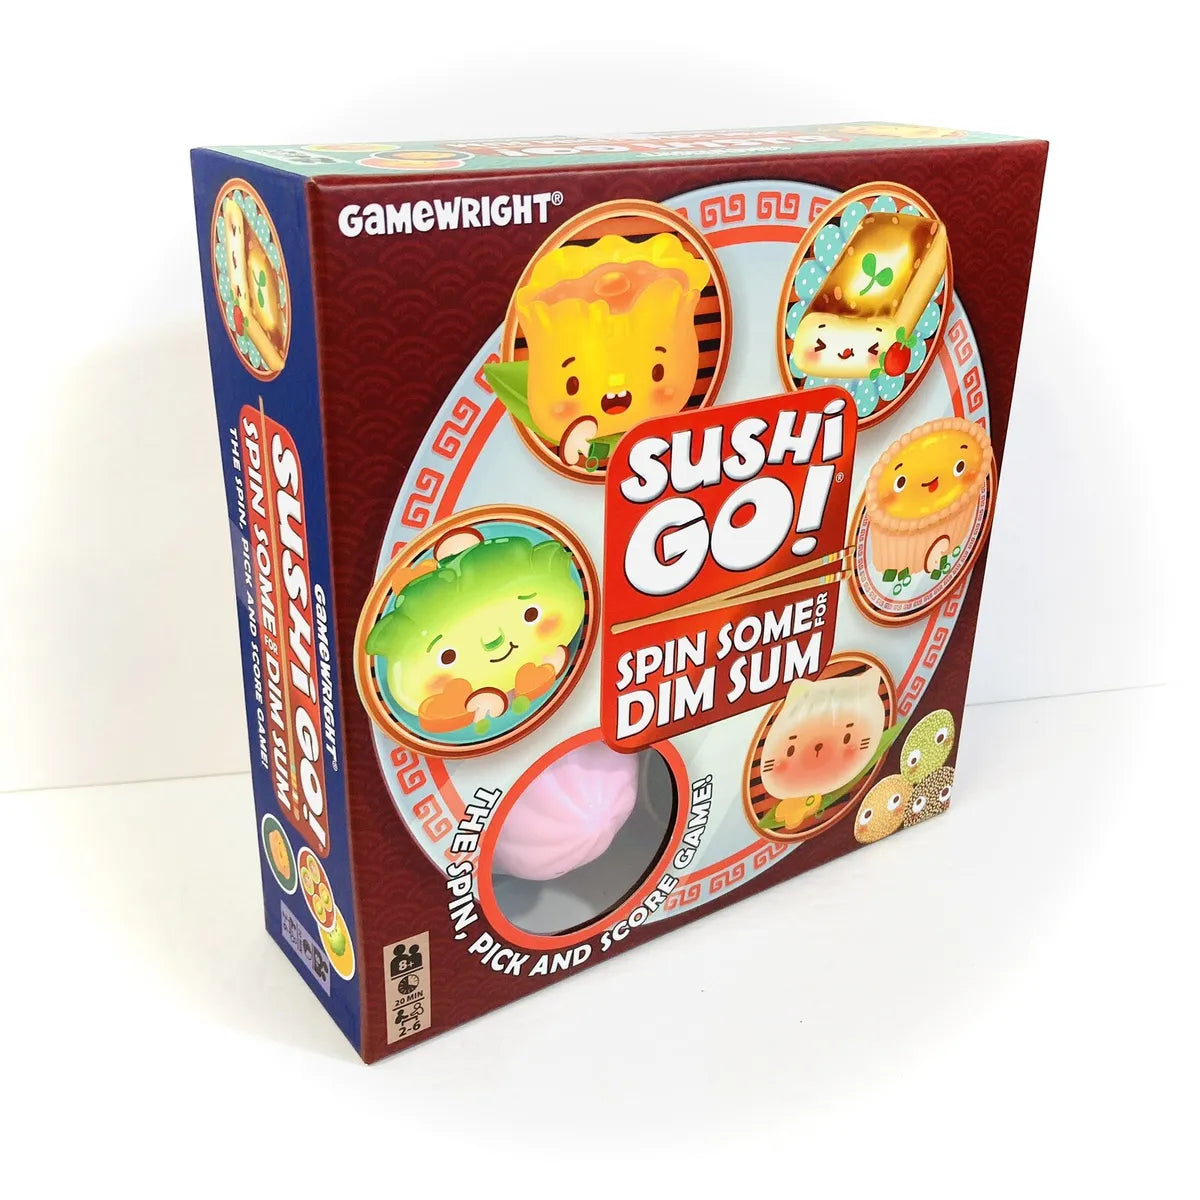 Sushi Go! Spin some for Dim sum | Multizone: Comics And Games